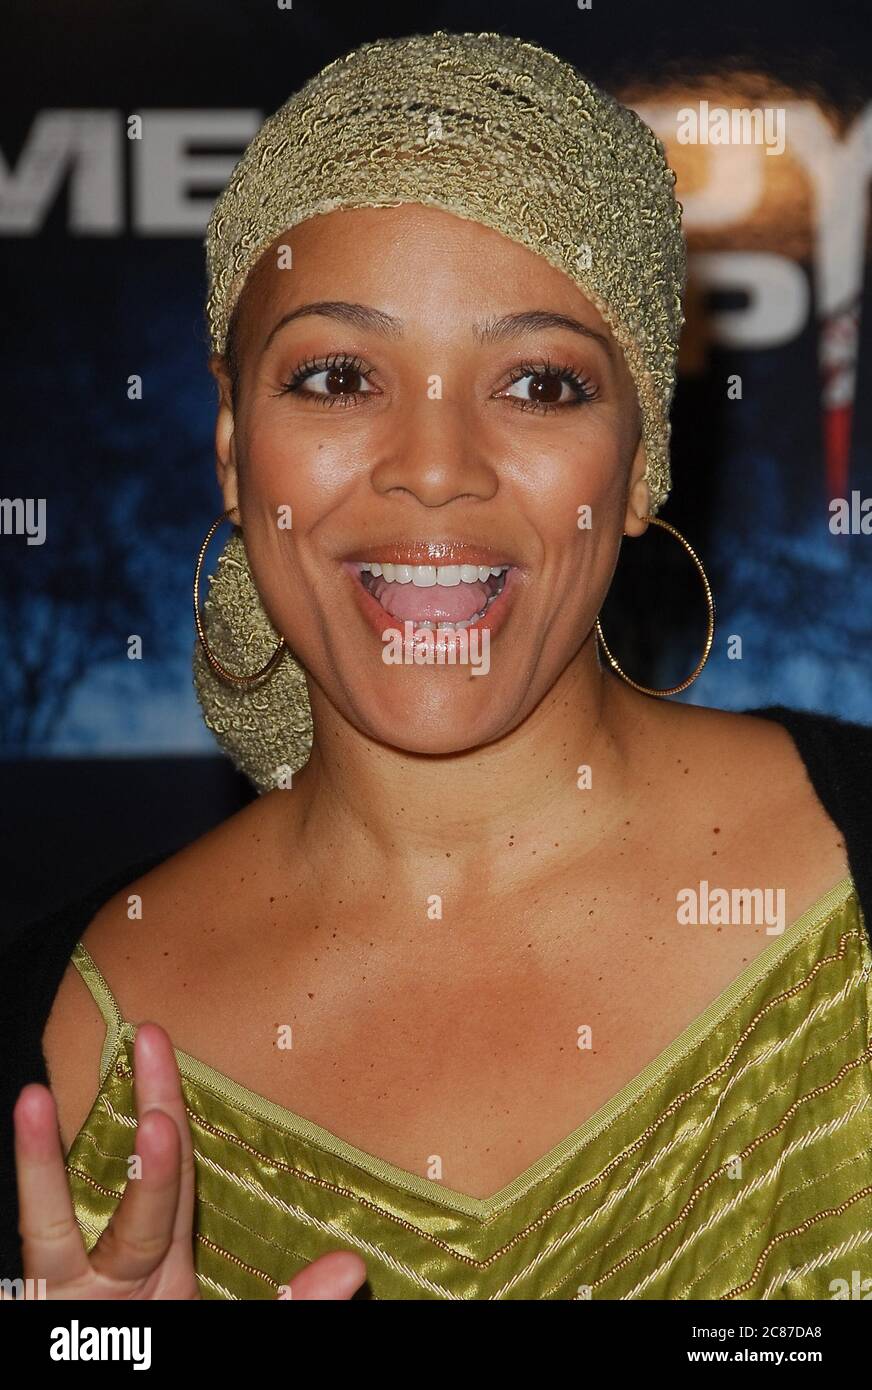 Kim Fields at the Premiere of 'Somebody Help Me' held at the Grauman's Chinese Theater in Hollywood, CA. The event took place on Thursday, October25, 2007. Photo by: SBM / PictureLux- File Reference # 34006-9101SBMPLX Stock Photo